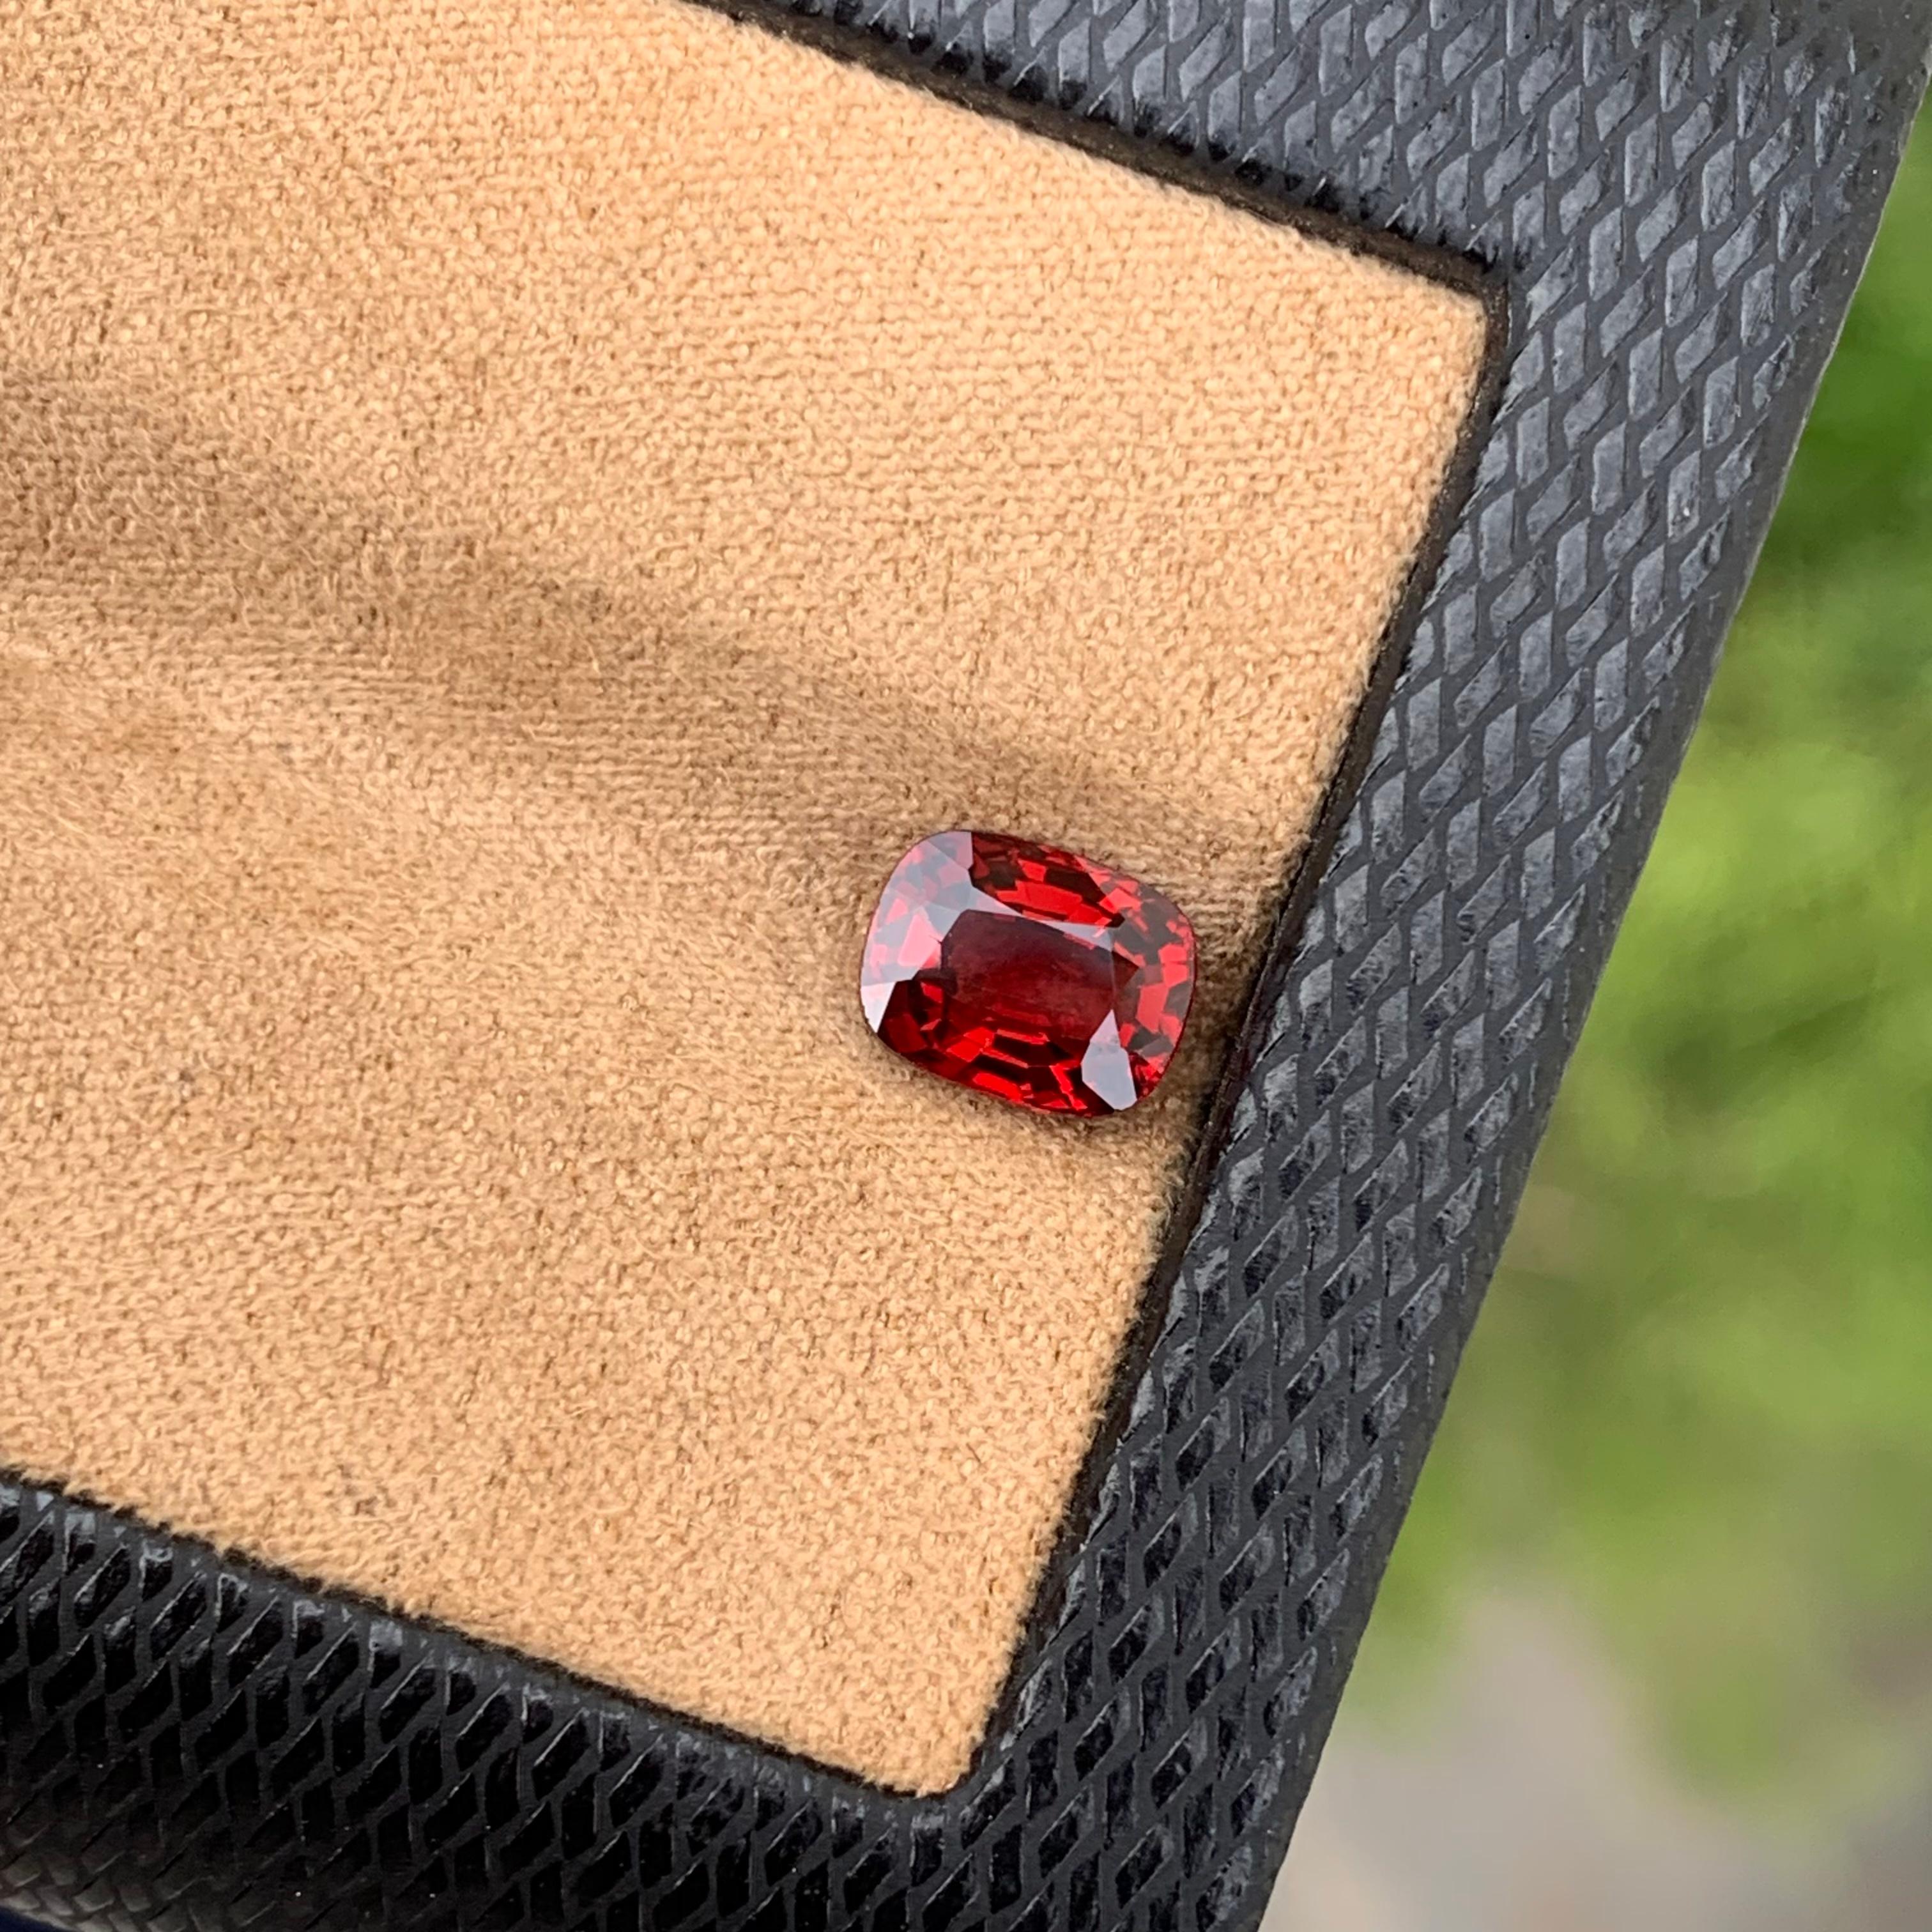 Faceted Red Spinel
Weight: 1.45 Carats
Dimension: 7.4x5.8x3.8 Mm
Origin: Burma Myanmar
Shape: Cushion
Color: Red
Treatment: Non / Natural
Certificate: On Demand
.
The red spinel gemstone is linked to the root chakra and is beneficial in boosting